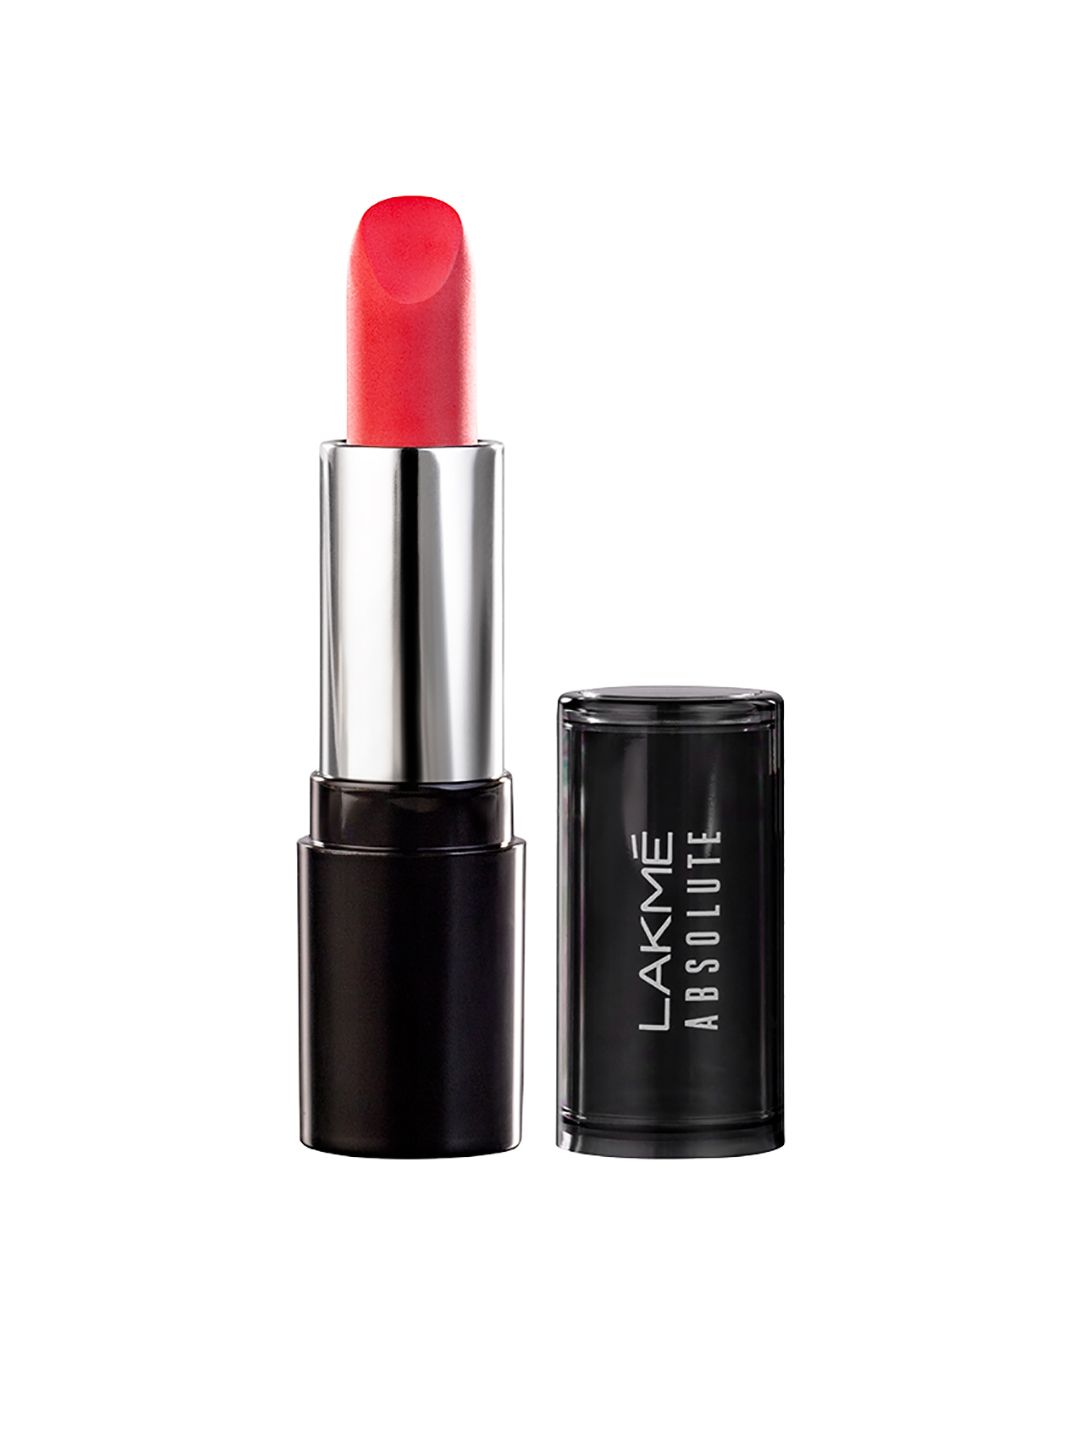 Lakme Absolute Matte Revolution Lip Color- Coral Pink 403 3.5g Price in India